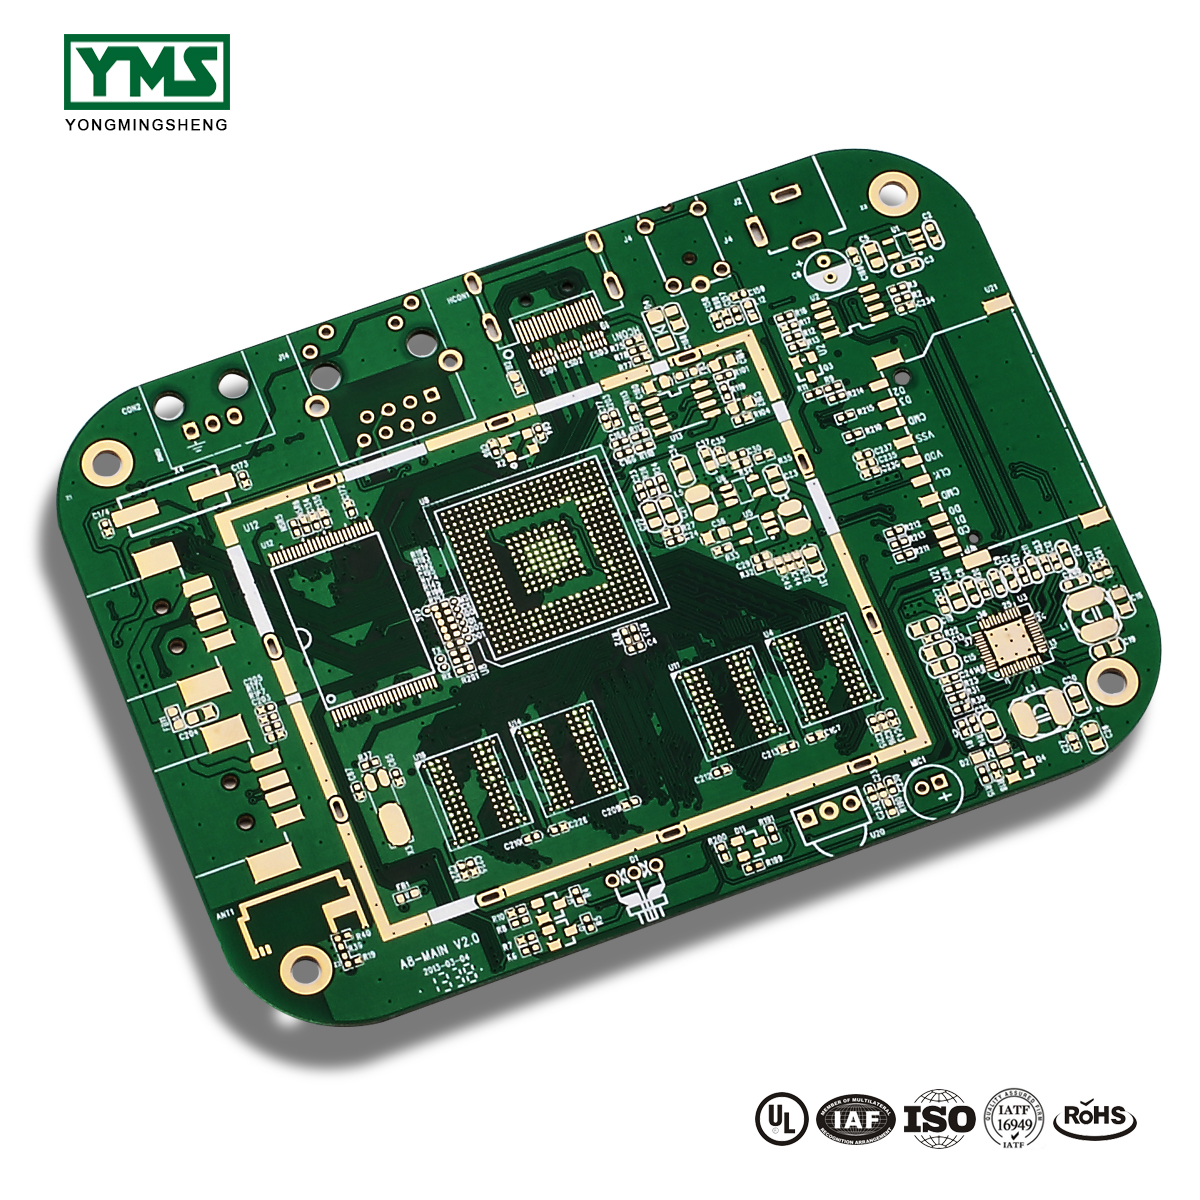 Fixed Competitive Price 2 Step Hdi Board - Competitive Price for 21 Years Experience Pcb Printed Circuit Board In Shenzhen – Yongmingsheng